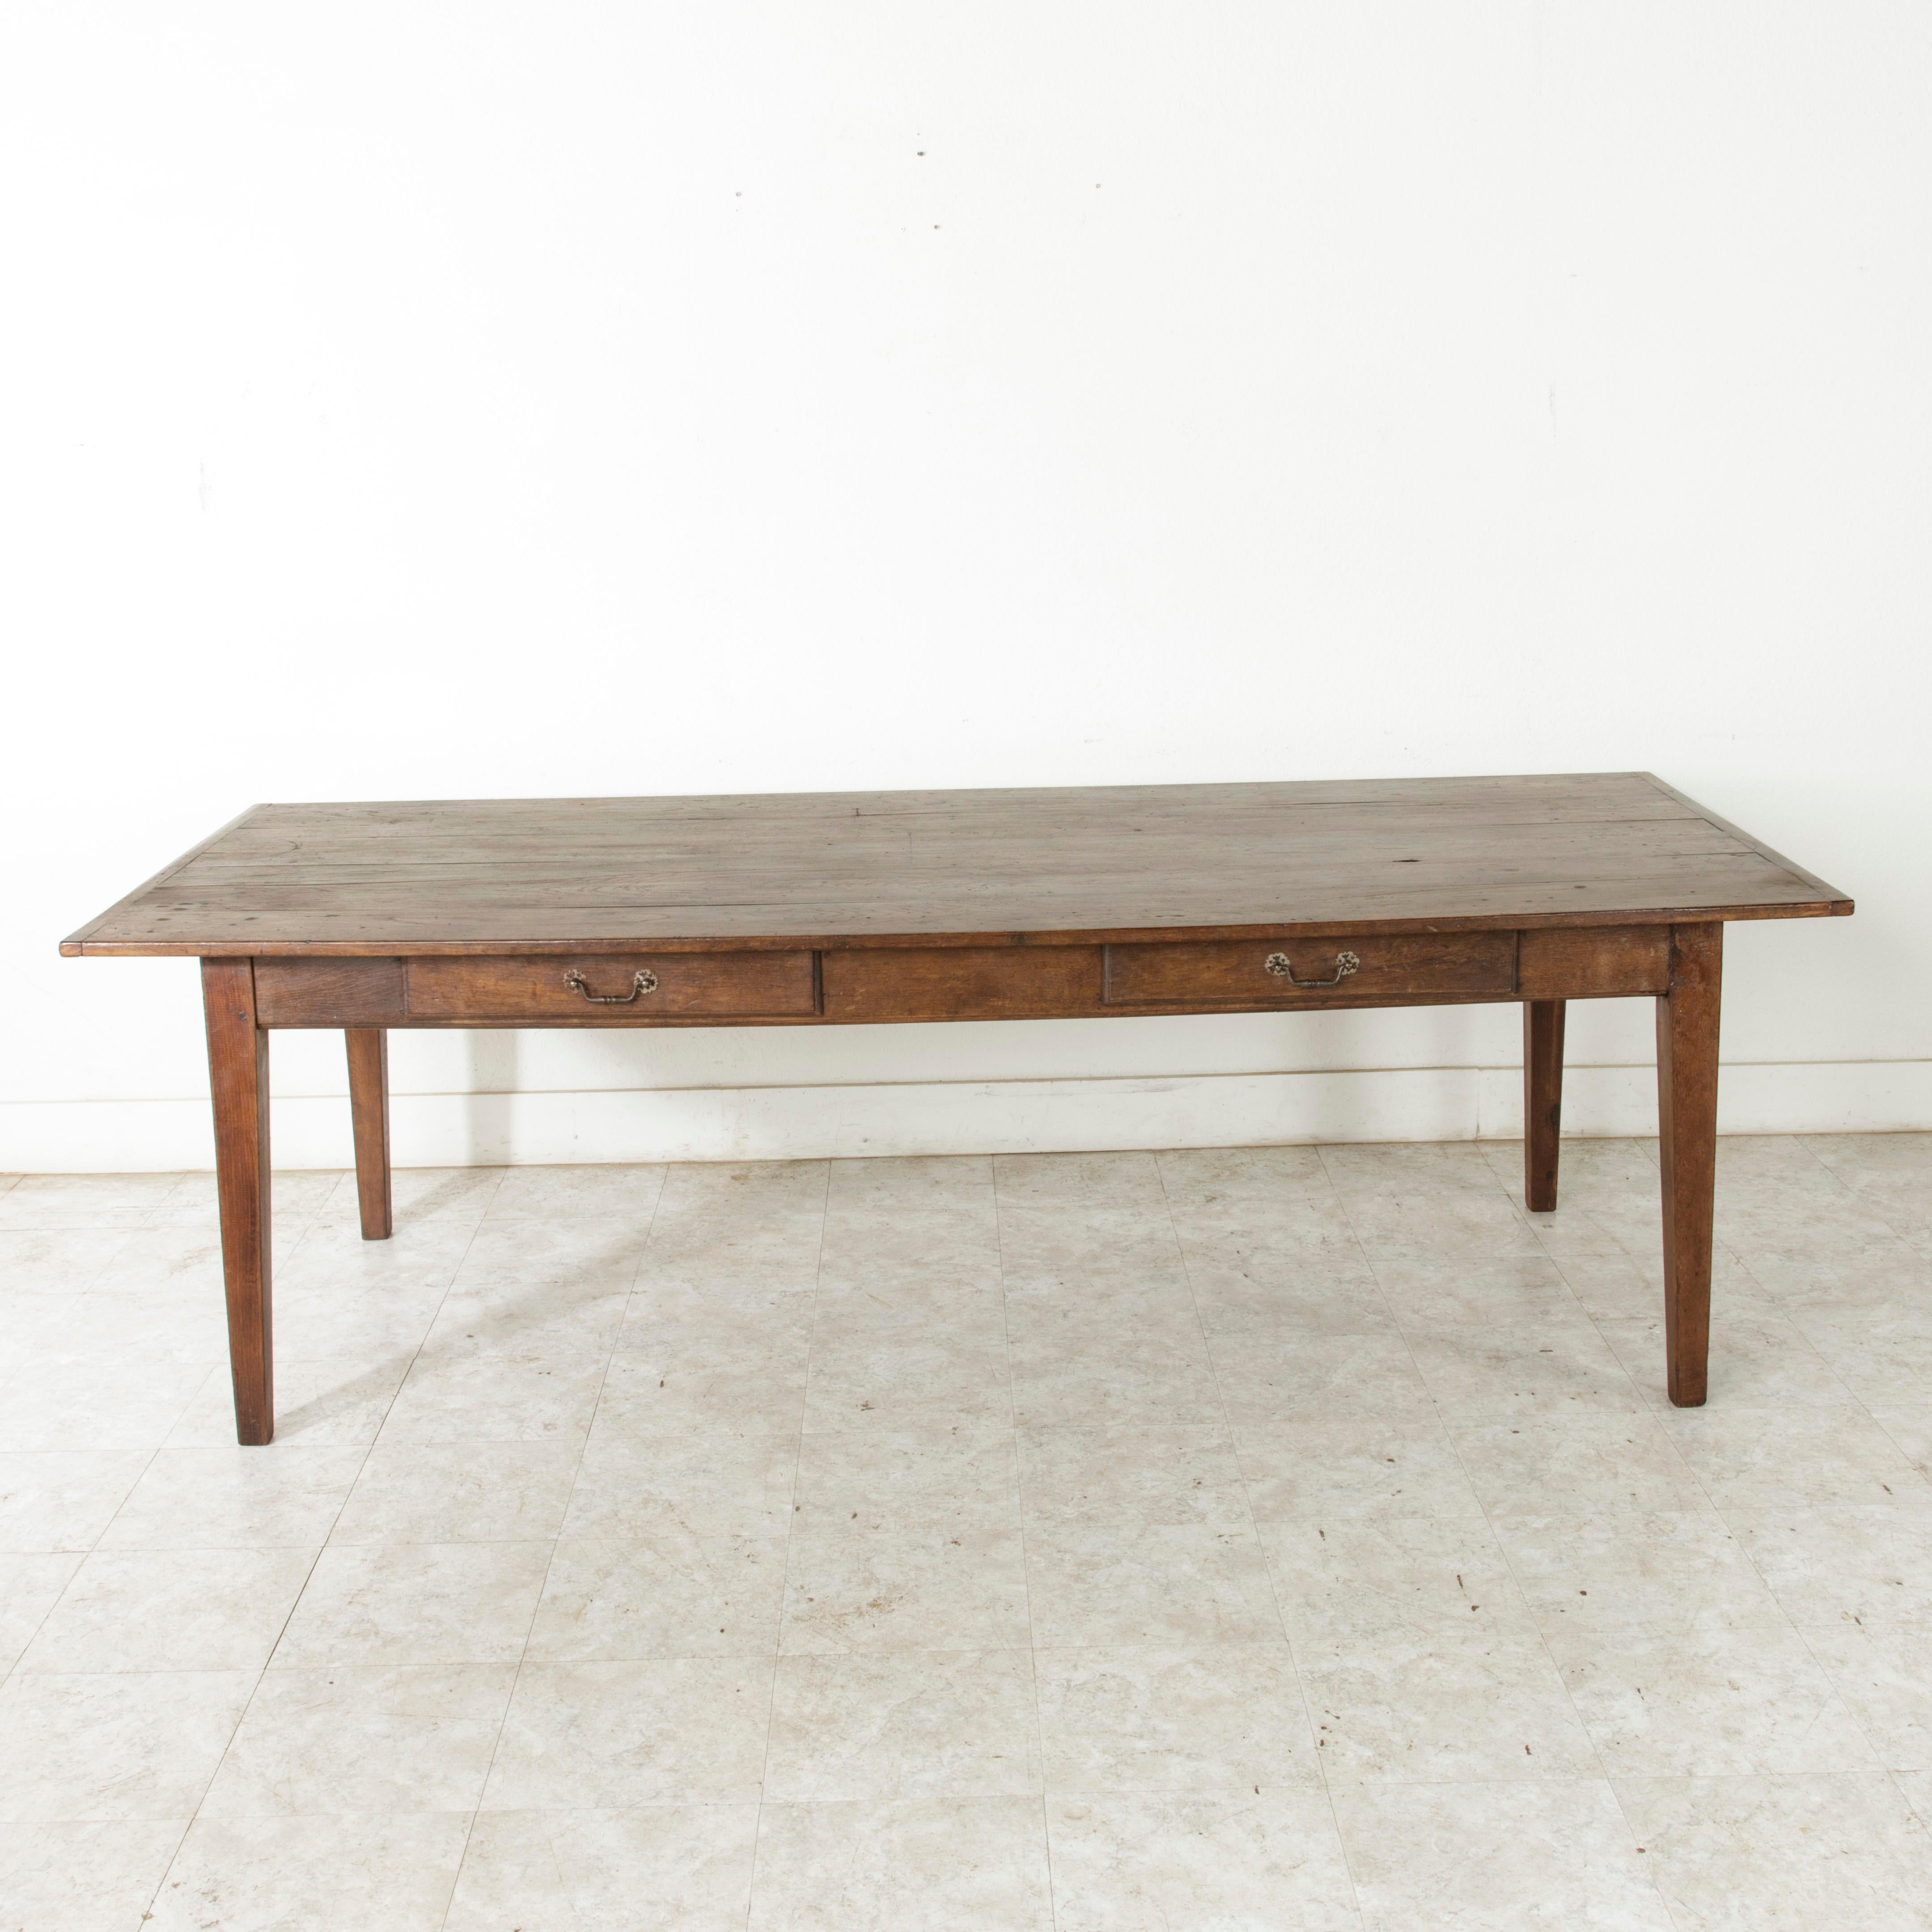 This turn of the 20th century artisan-made farm table is from the region of Le Perche, a sub-region of Normandy, France. Its hand pegged oak top measures 94.5 inches long and 39.25 inches wide. Resting on a hand pegged oak base with four gently